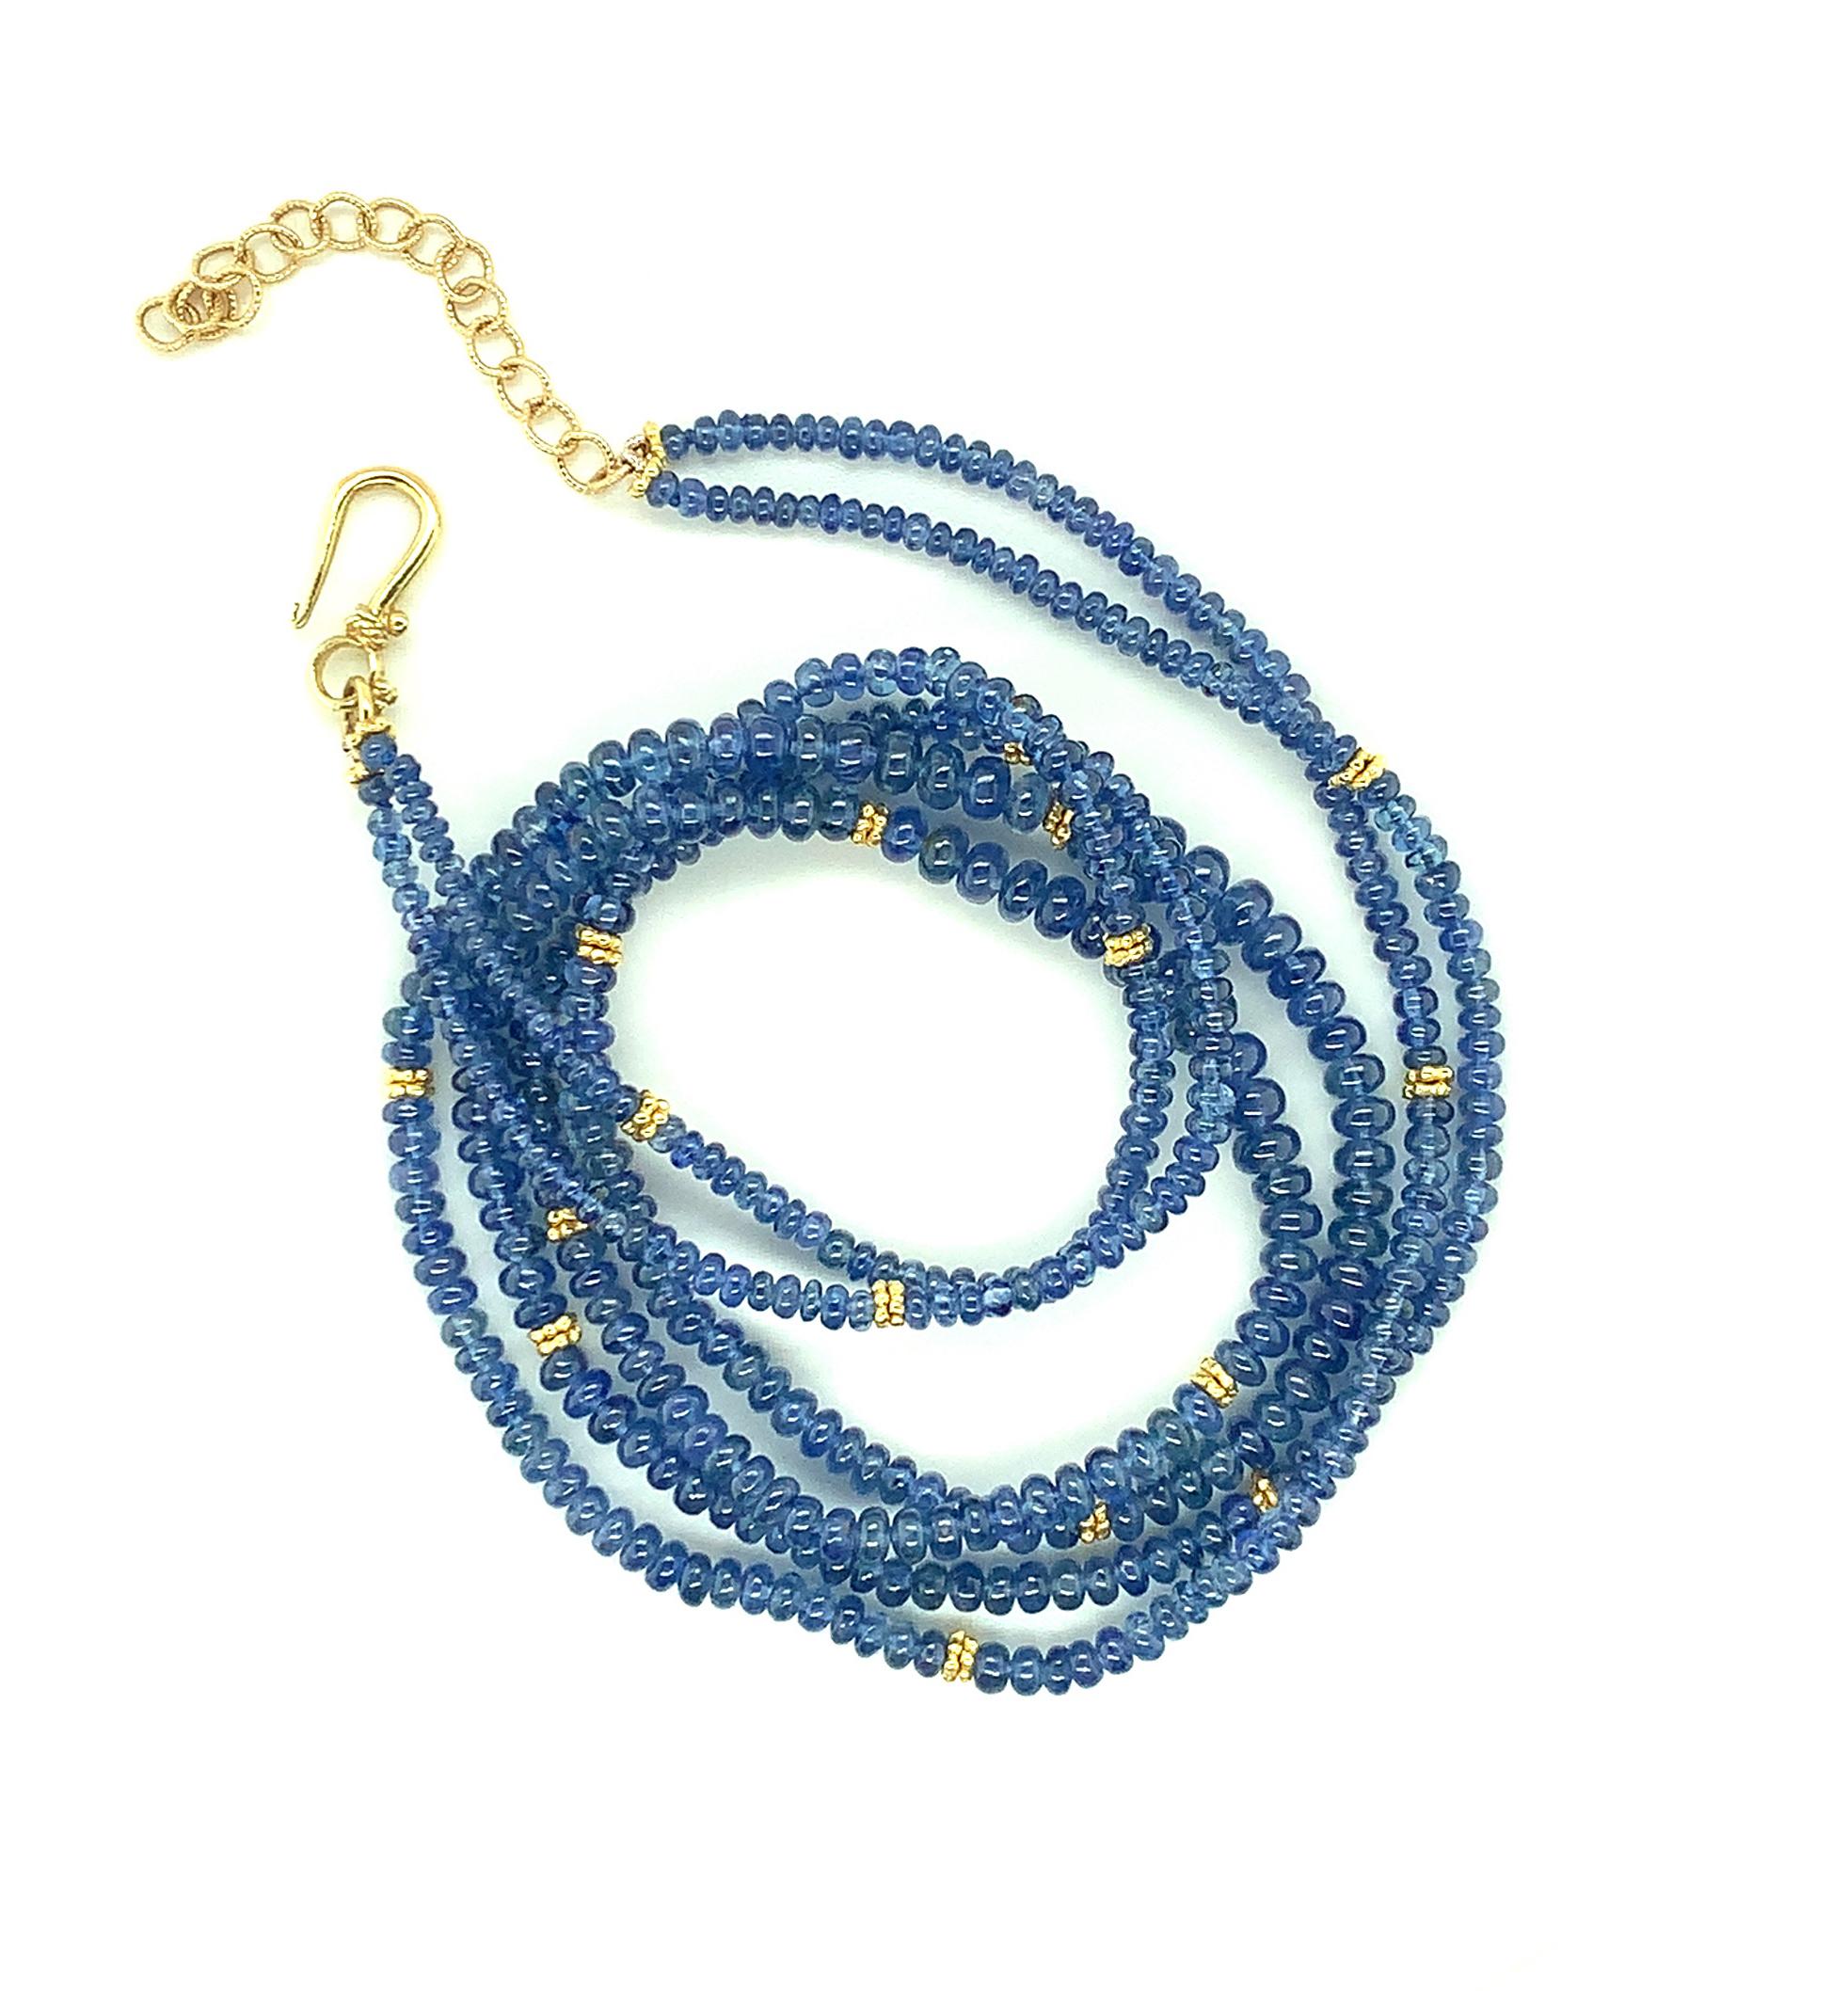 Artisan Blue Sapphire Bead, Double Strand Necklace, Yellow Gold Spacers and Clasp